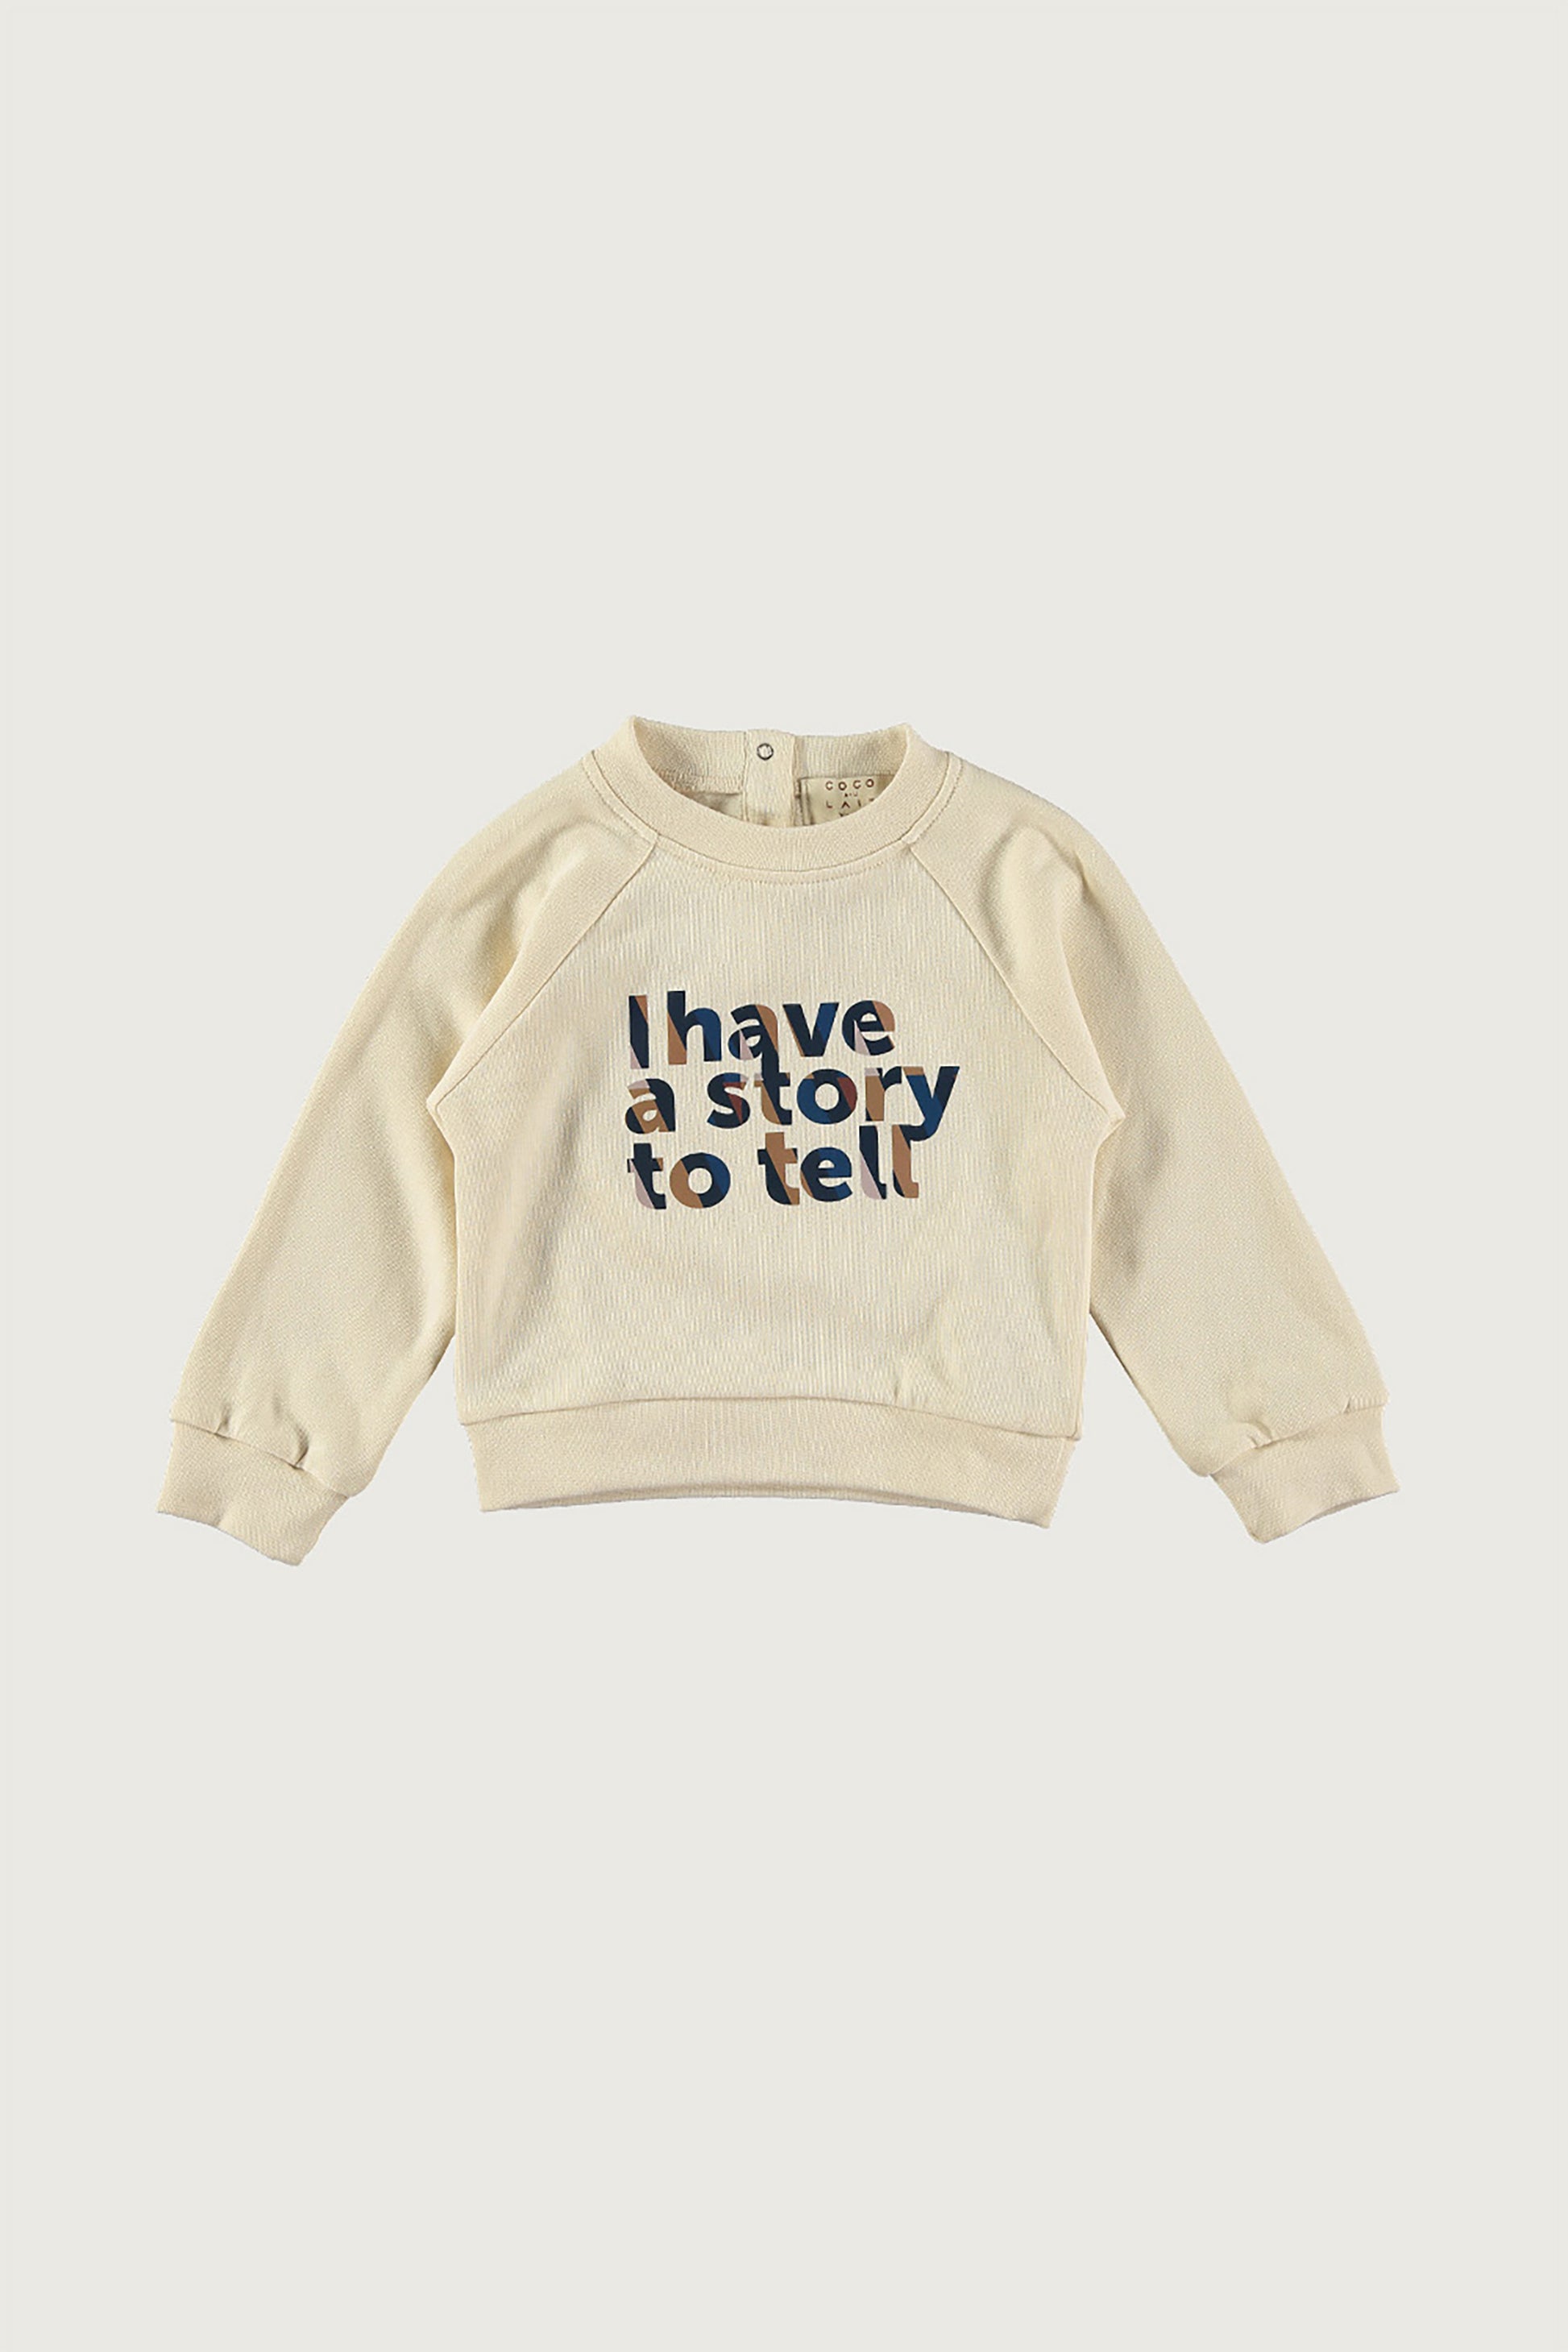 Coco Au Lait I HAVE A STORY TO TELL BABY SWEATSHIRT  Parchment